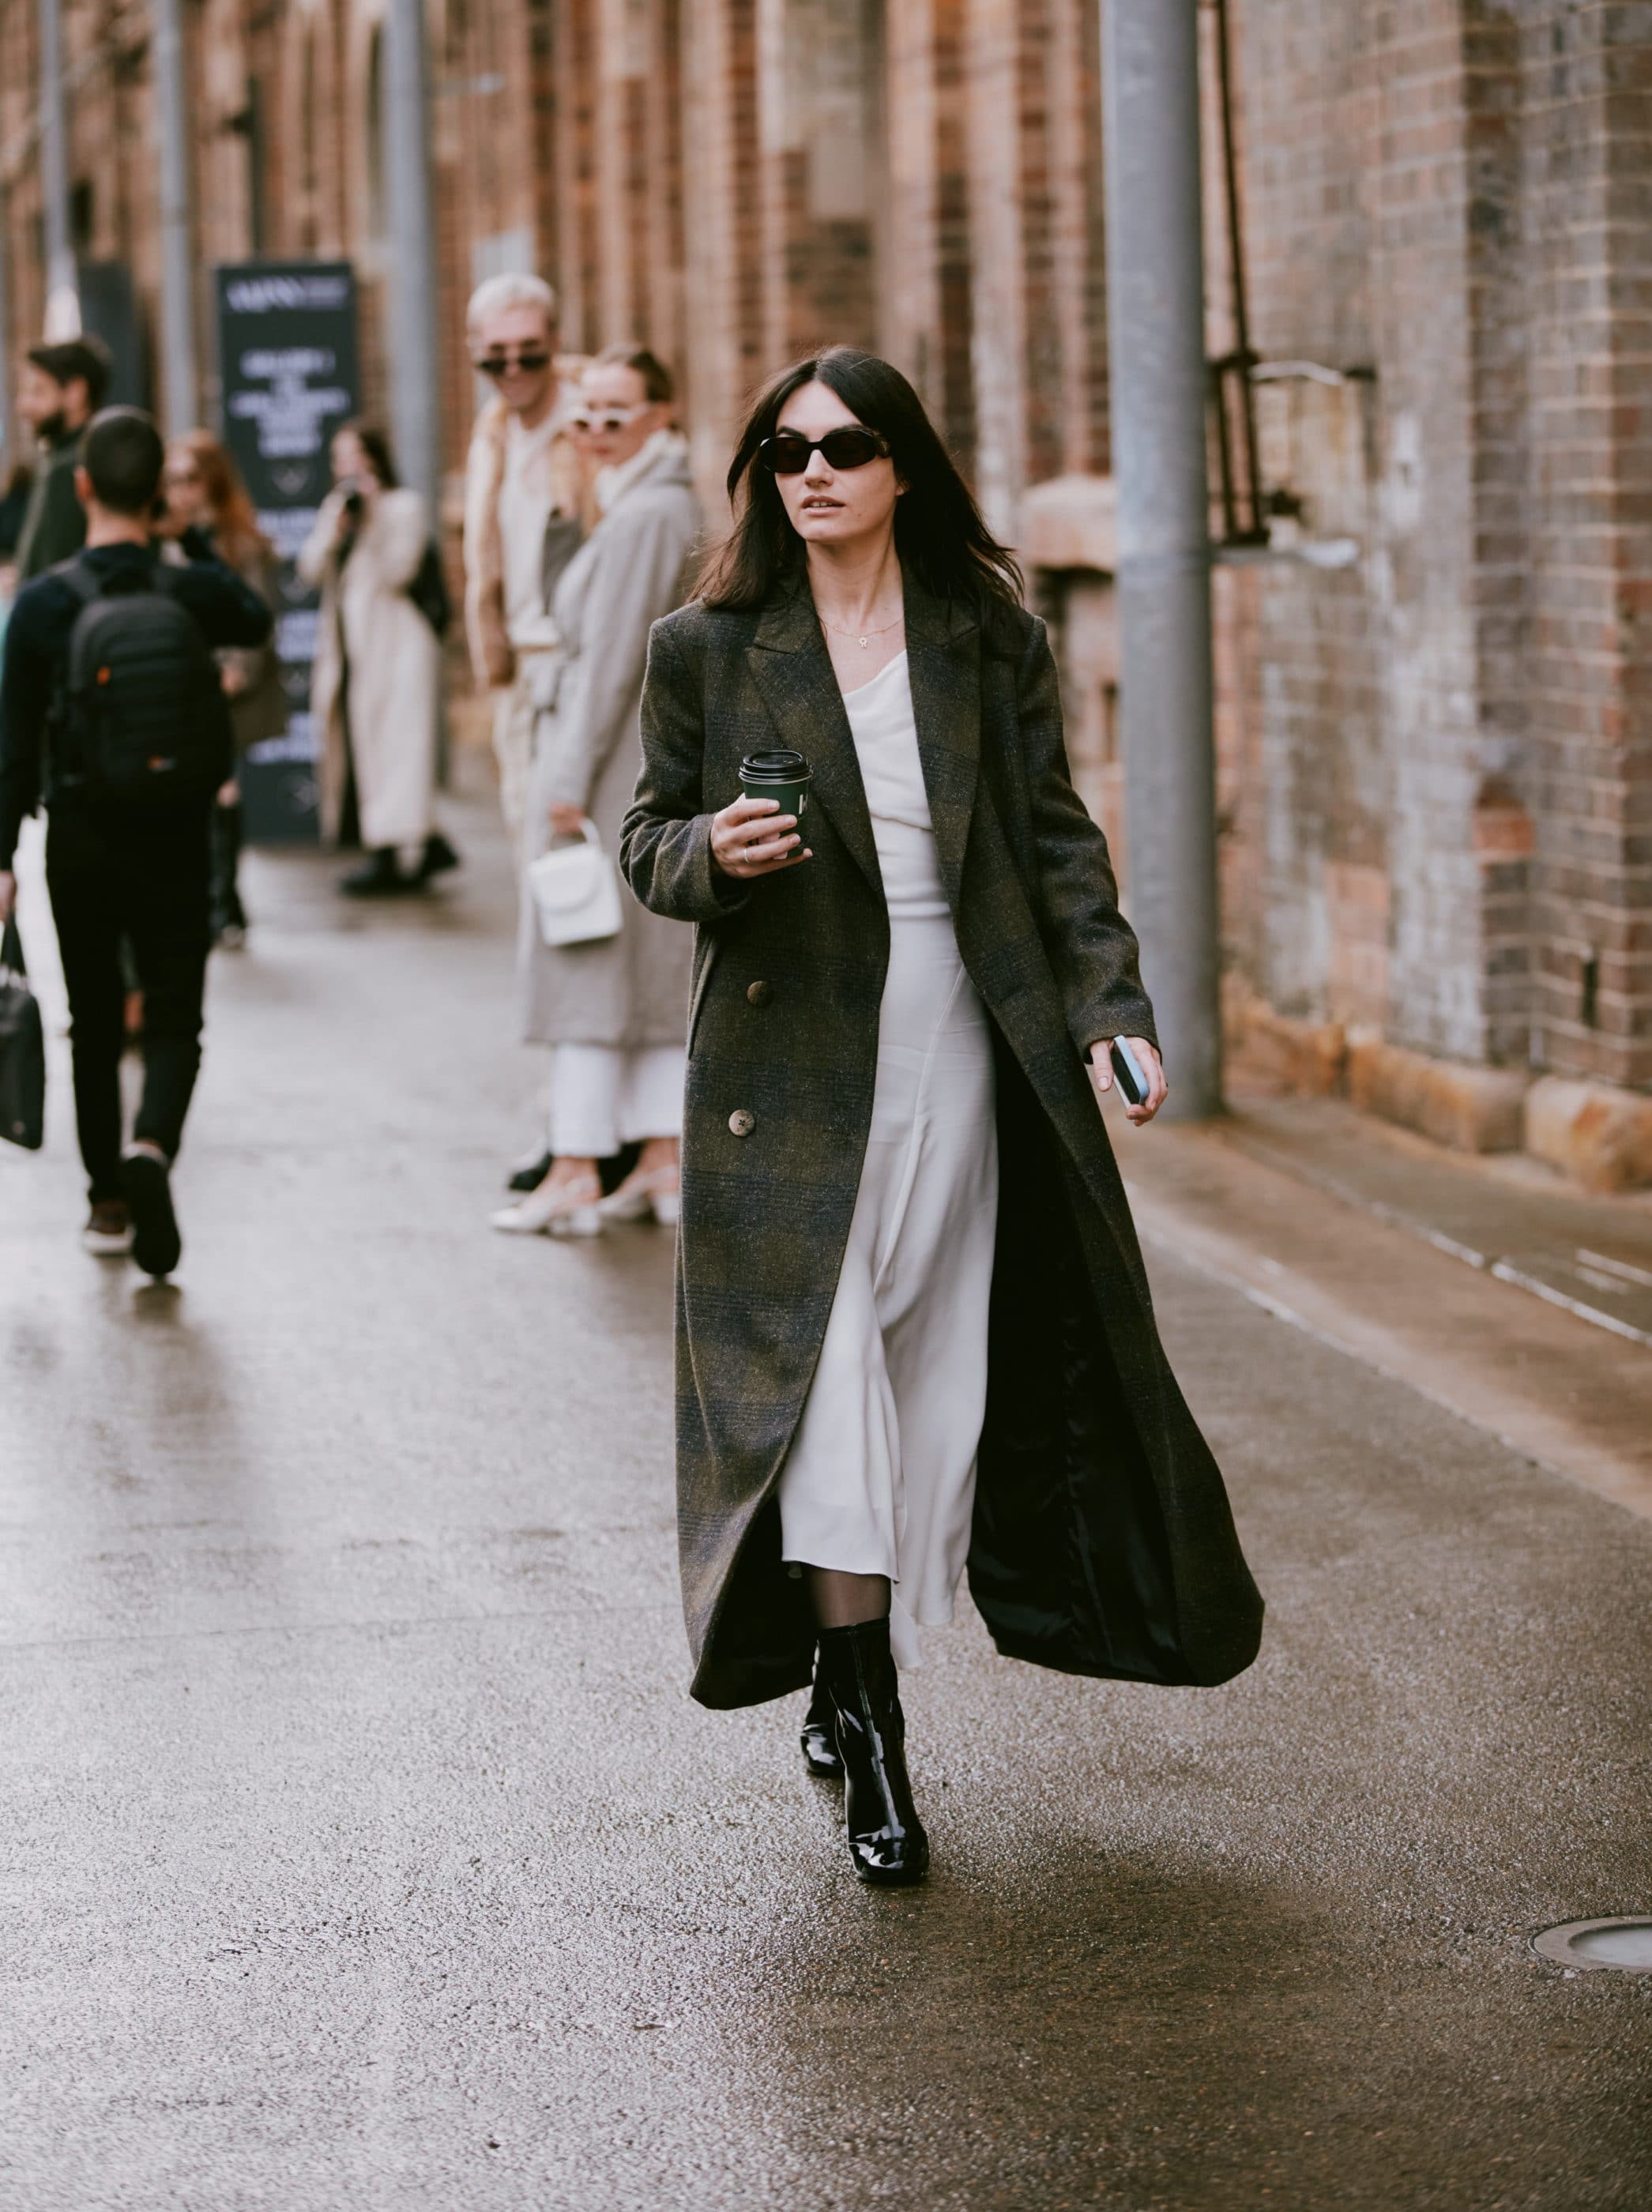 The Best Street Style From Afterpay Australian Fashion Week 2022